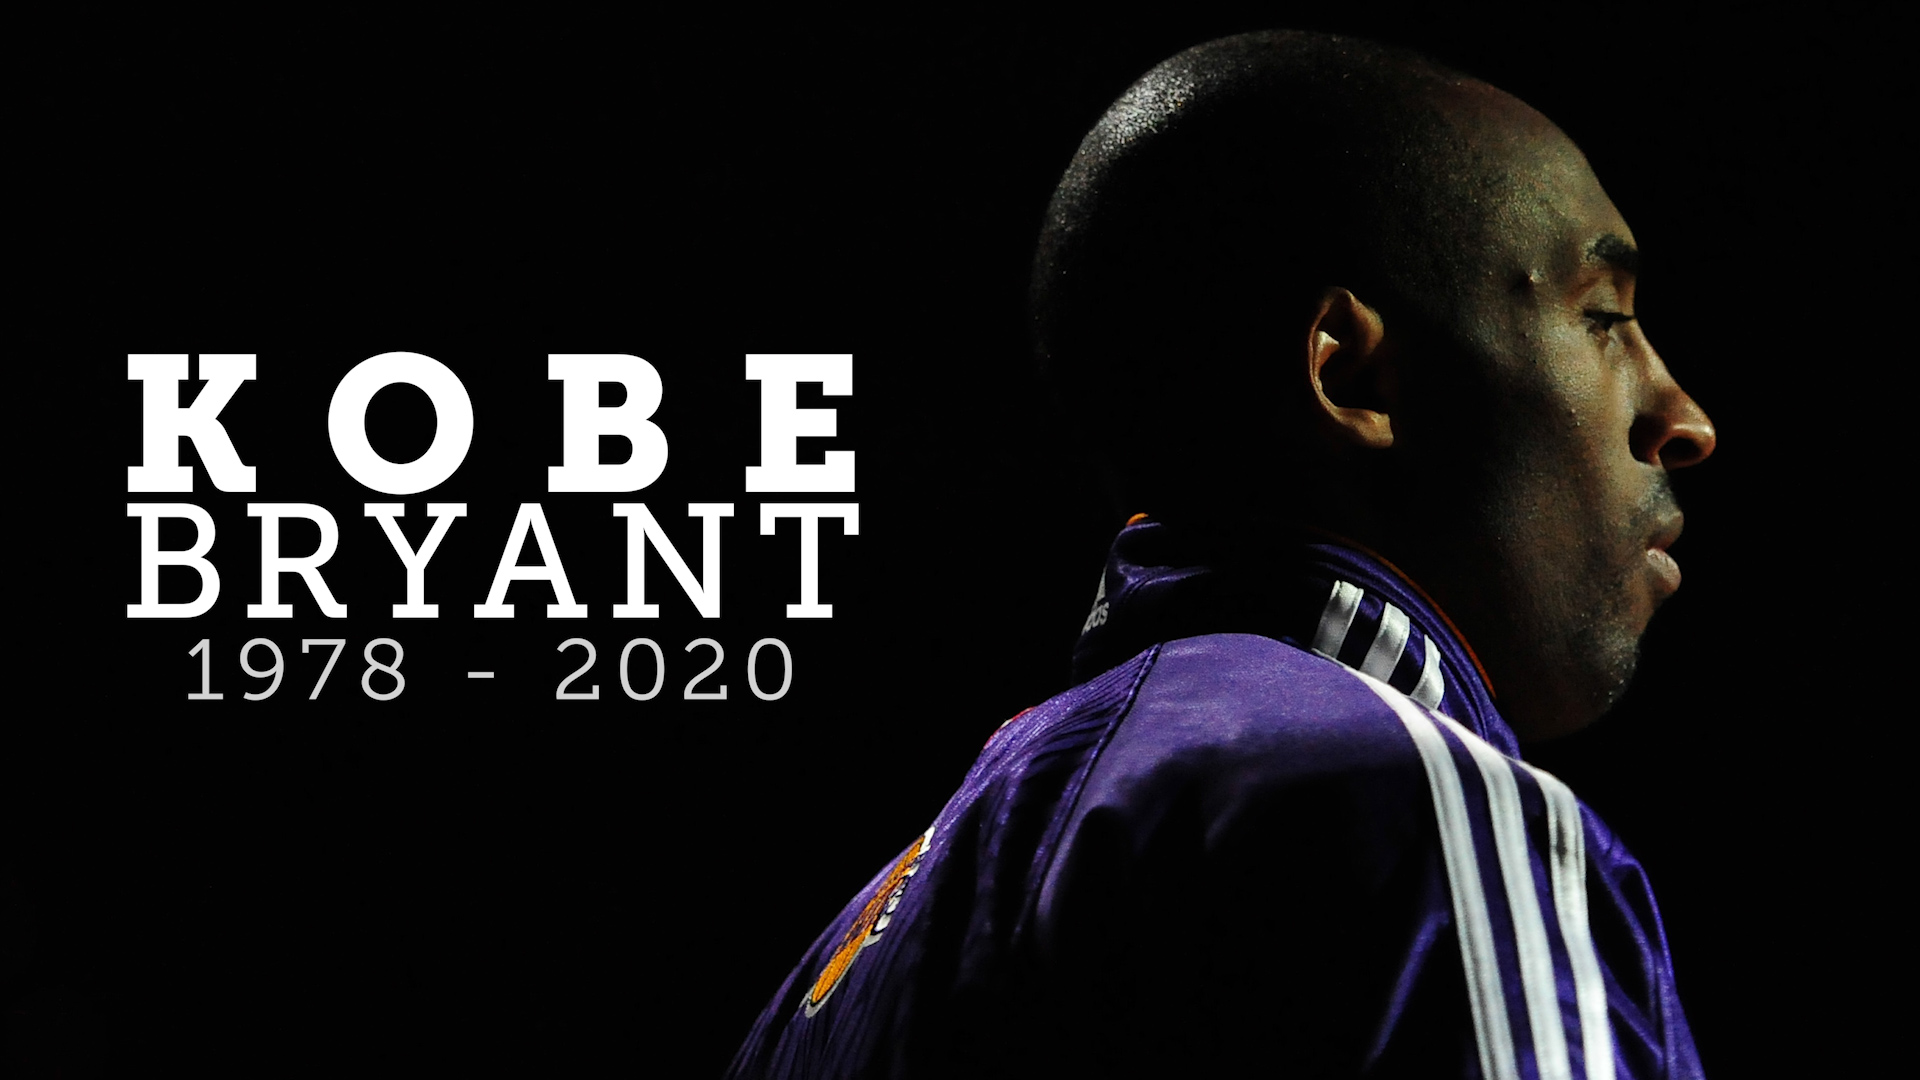 NFL-Kobe Bryant honored with moment of silence at Super Bowl